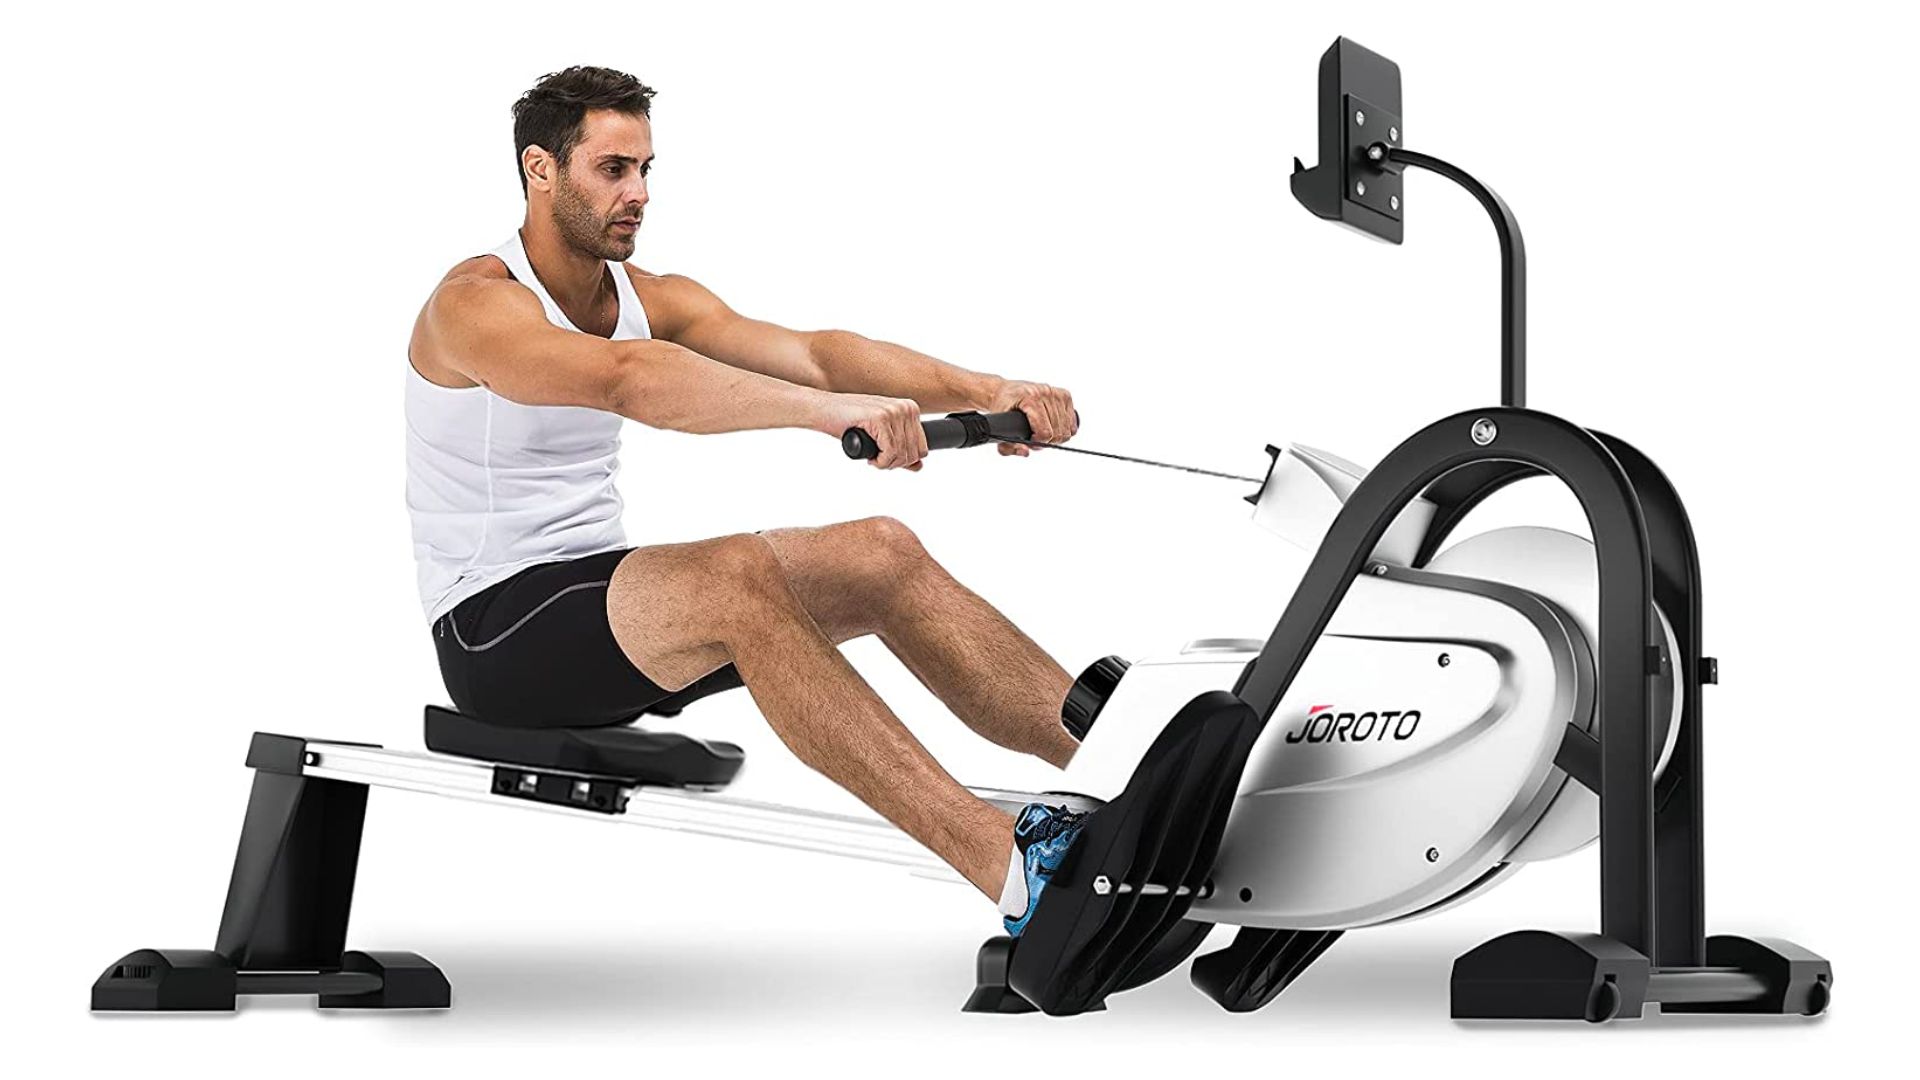 Best Rowing Machines For Seniors